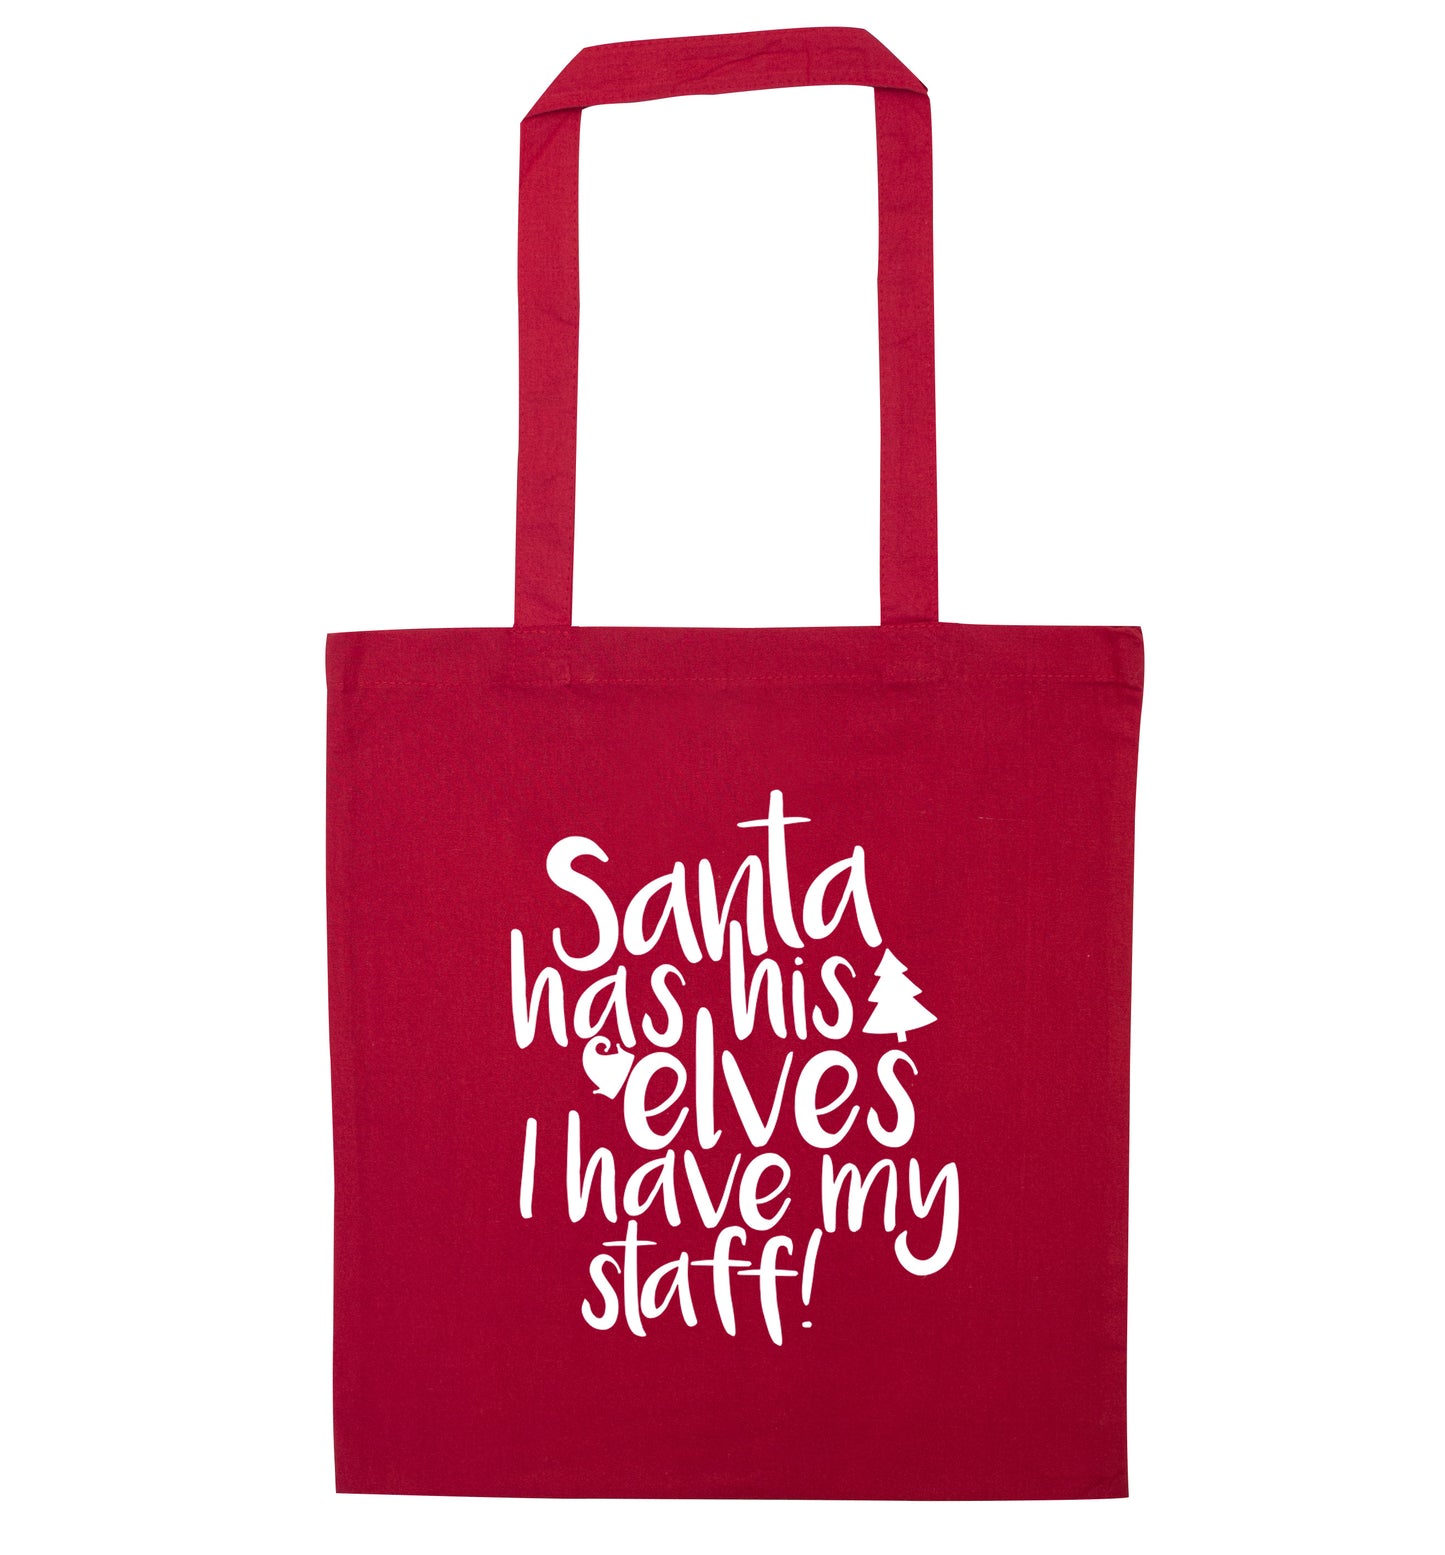 Santa has his elves I have my staff red tote bag